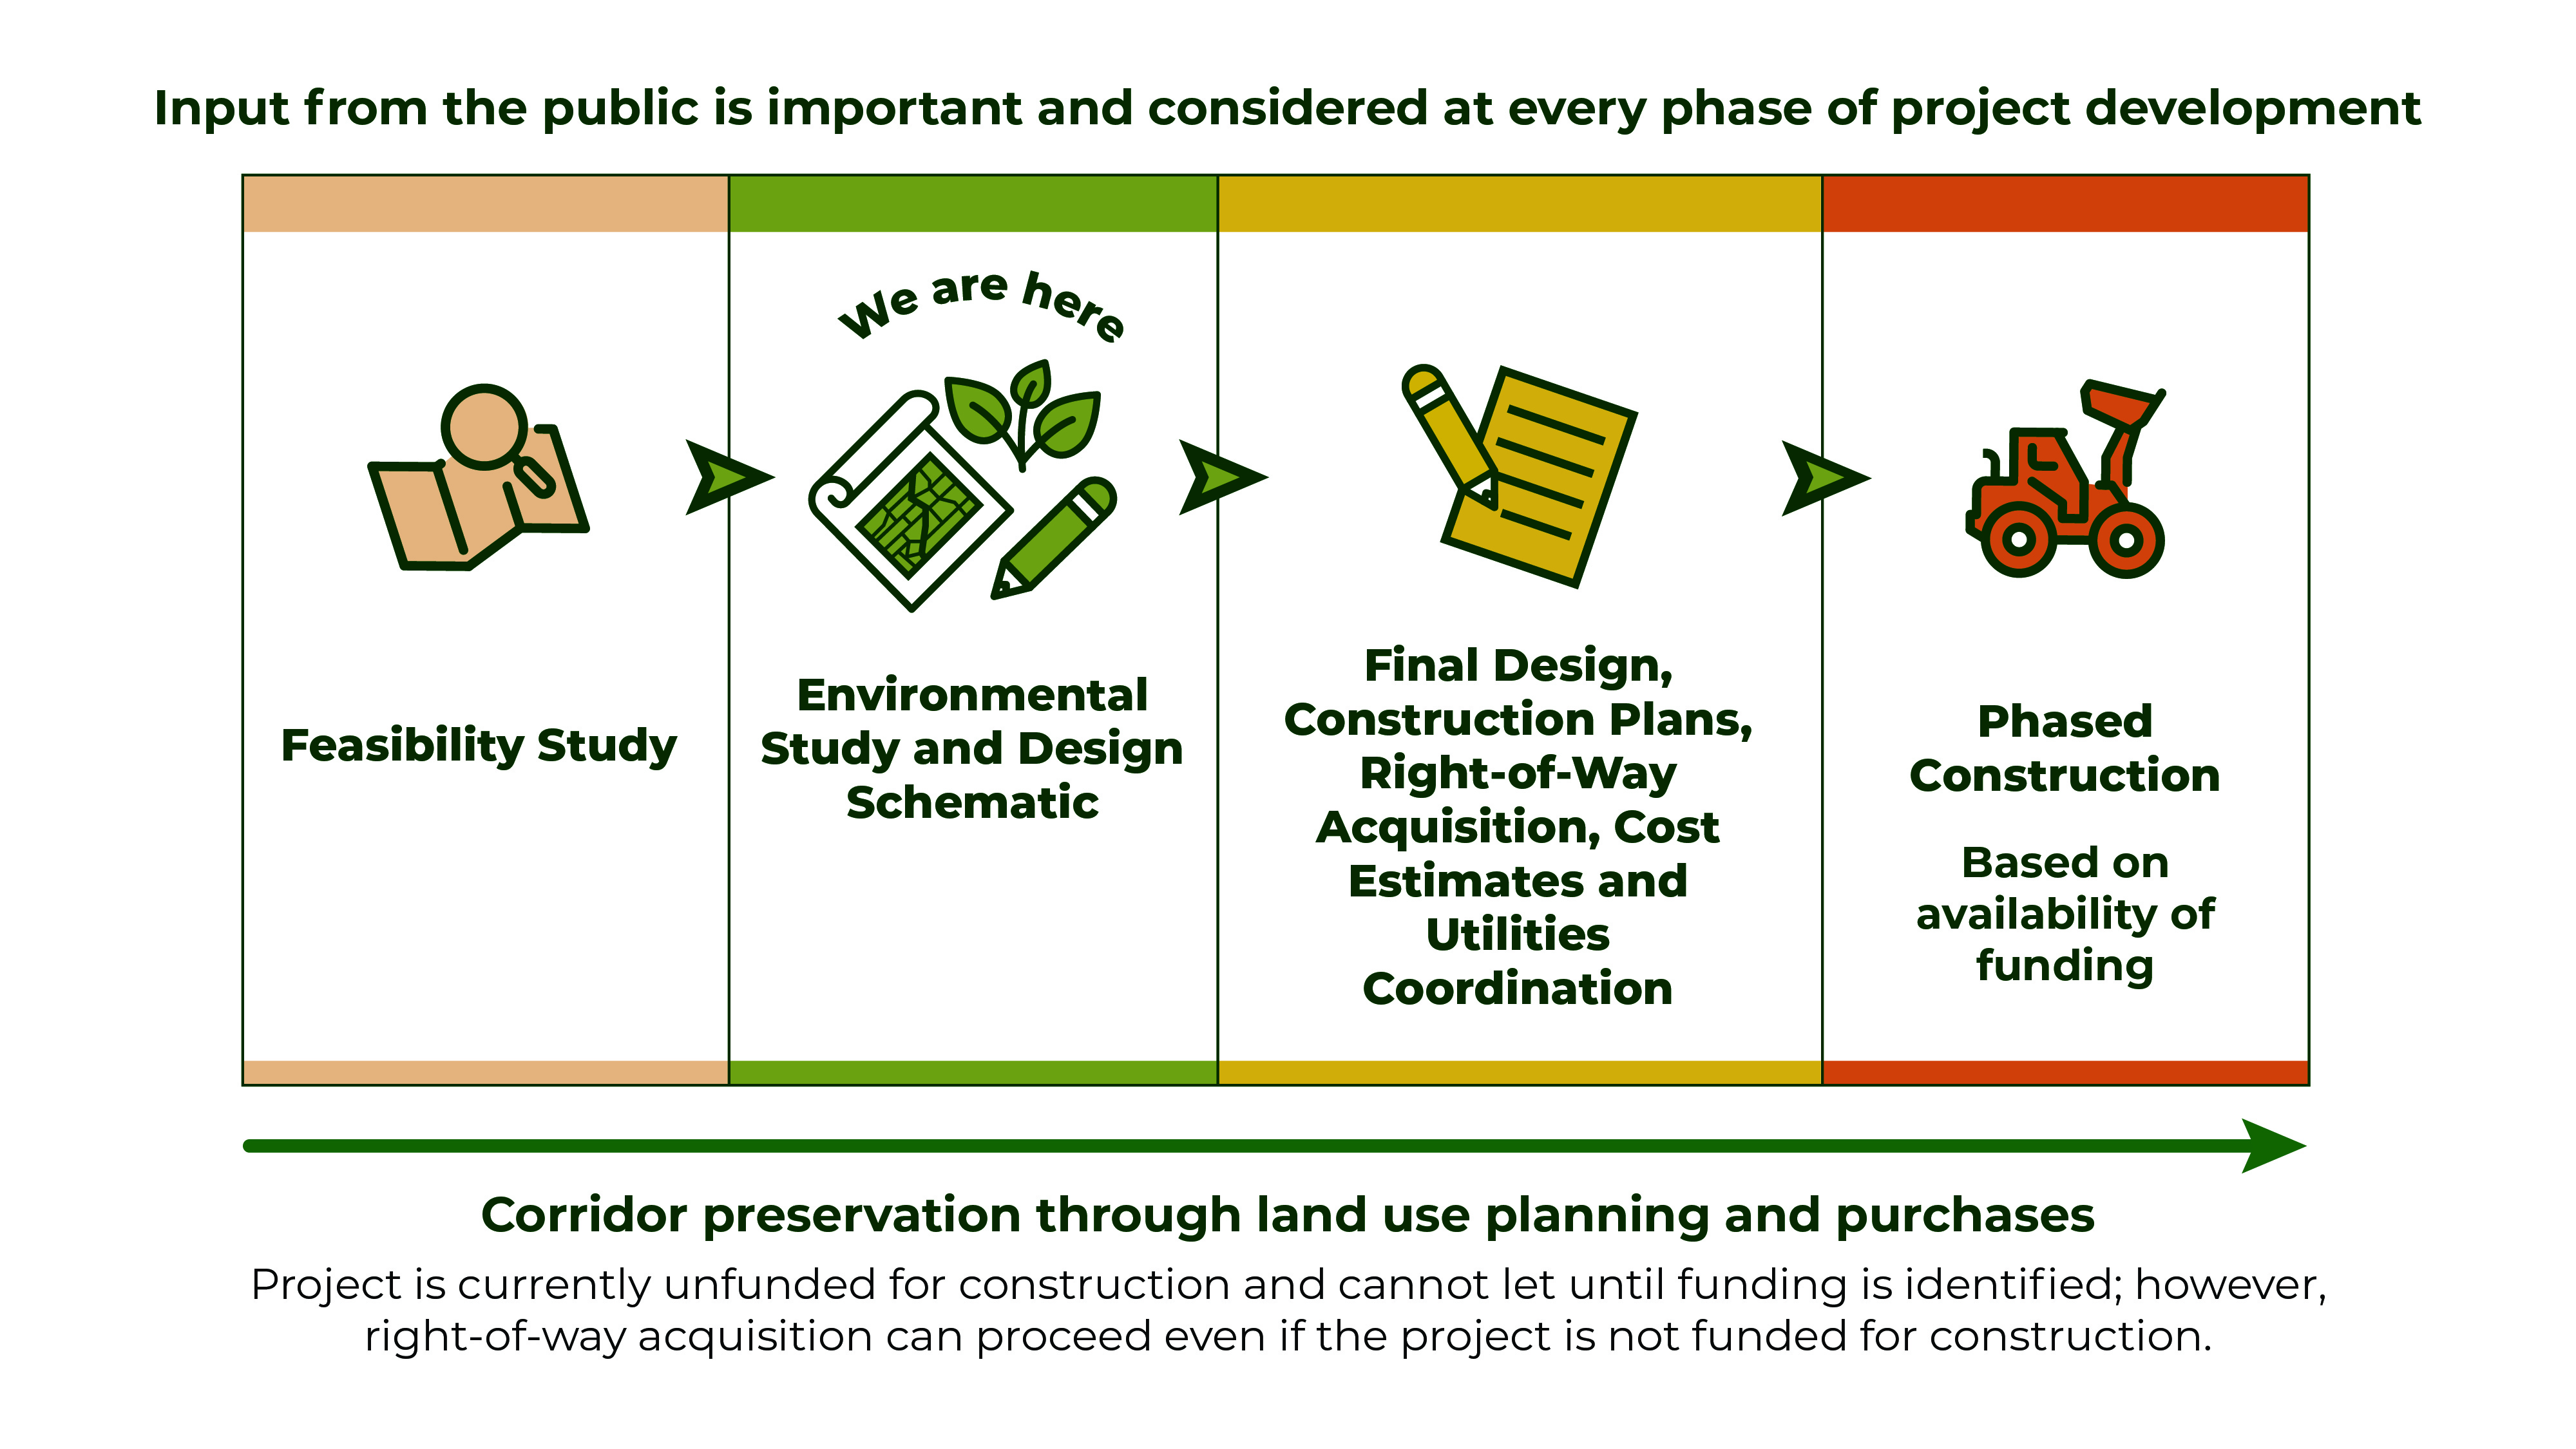 Input from the public is important and conisdered at every phase of project development. Graphic shows feasiblity study taking 1-2 years, Environmental Study and Design Schematic 1.5tears, Final Design, Consstruction Plans, Cost Estimates and Utilities coordination 2-3 years, and Phased Construction 2-5 years  (Per phase once funding is identified). Corridor prevenation through land use planning and purchases throughout entire project. No funding has been comitted to date as of August 2023.